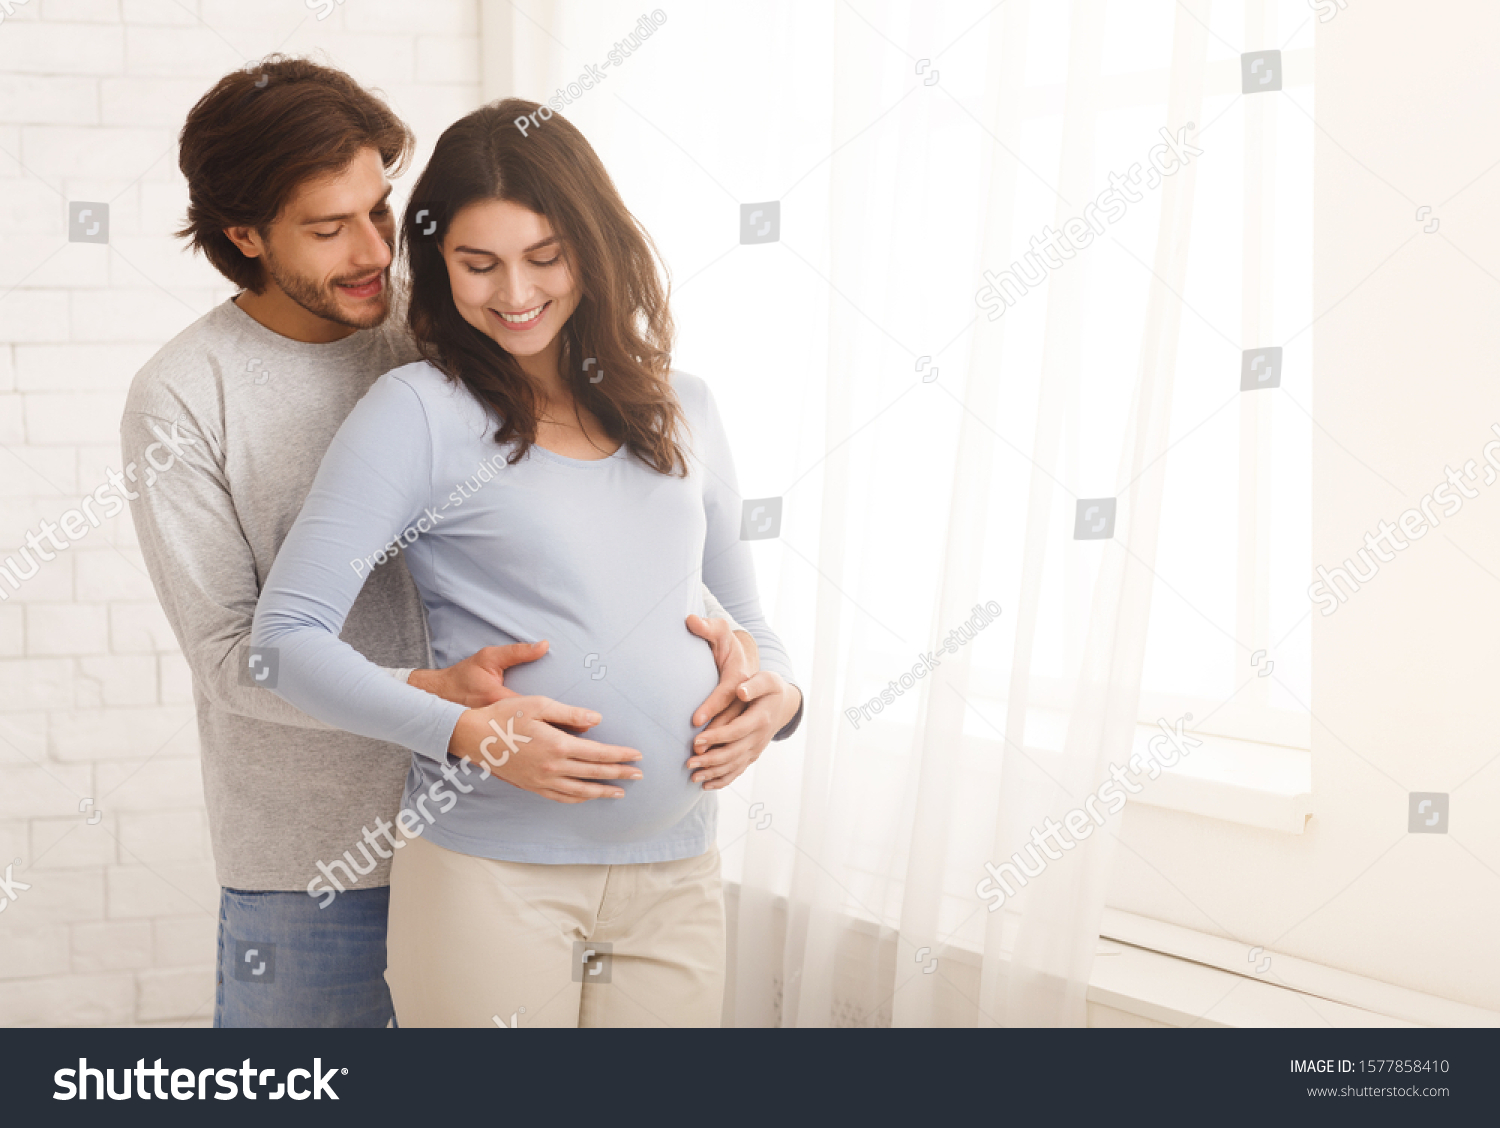 Loving man hugging his pregnant wife from behind standing near window at home, copy space #1577858410